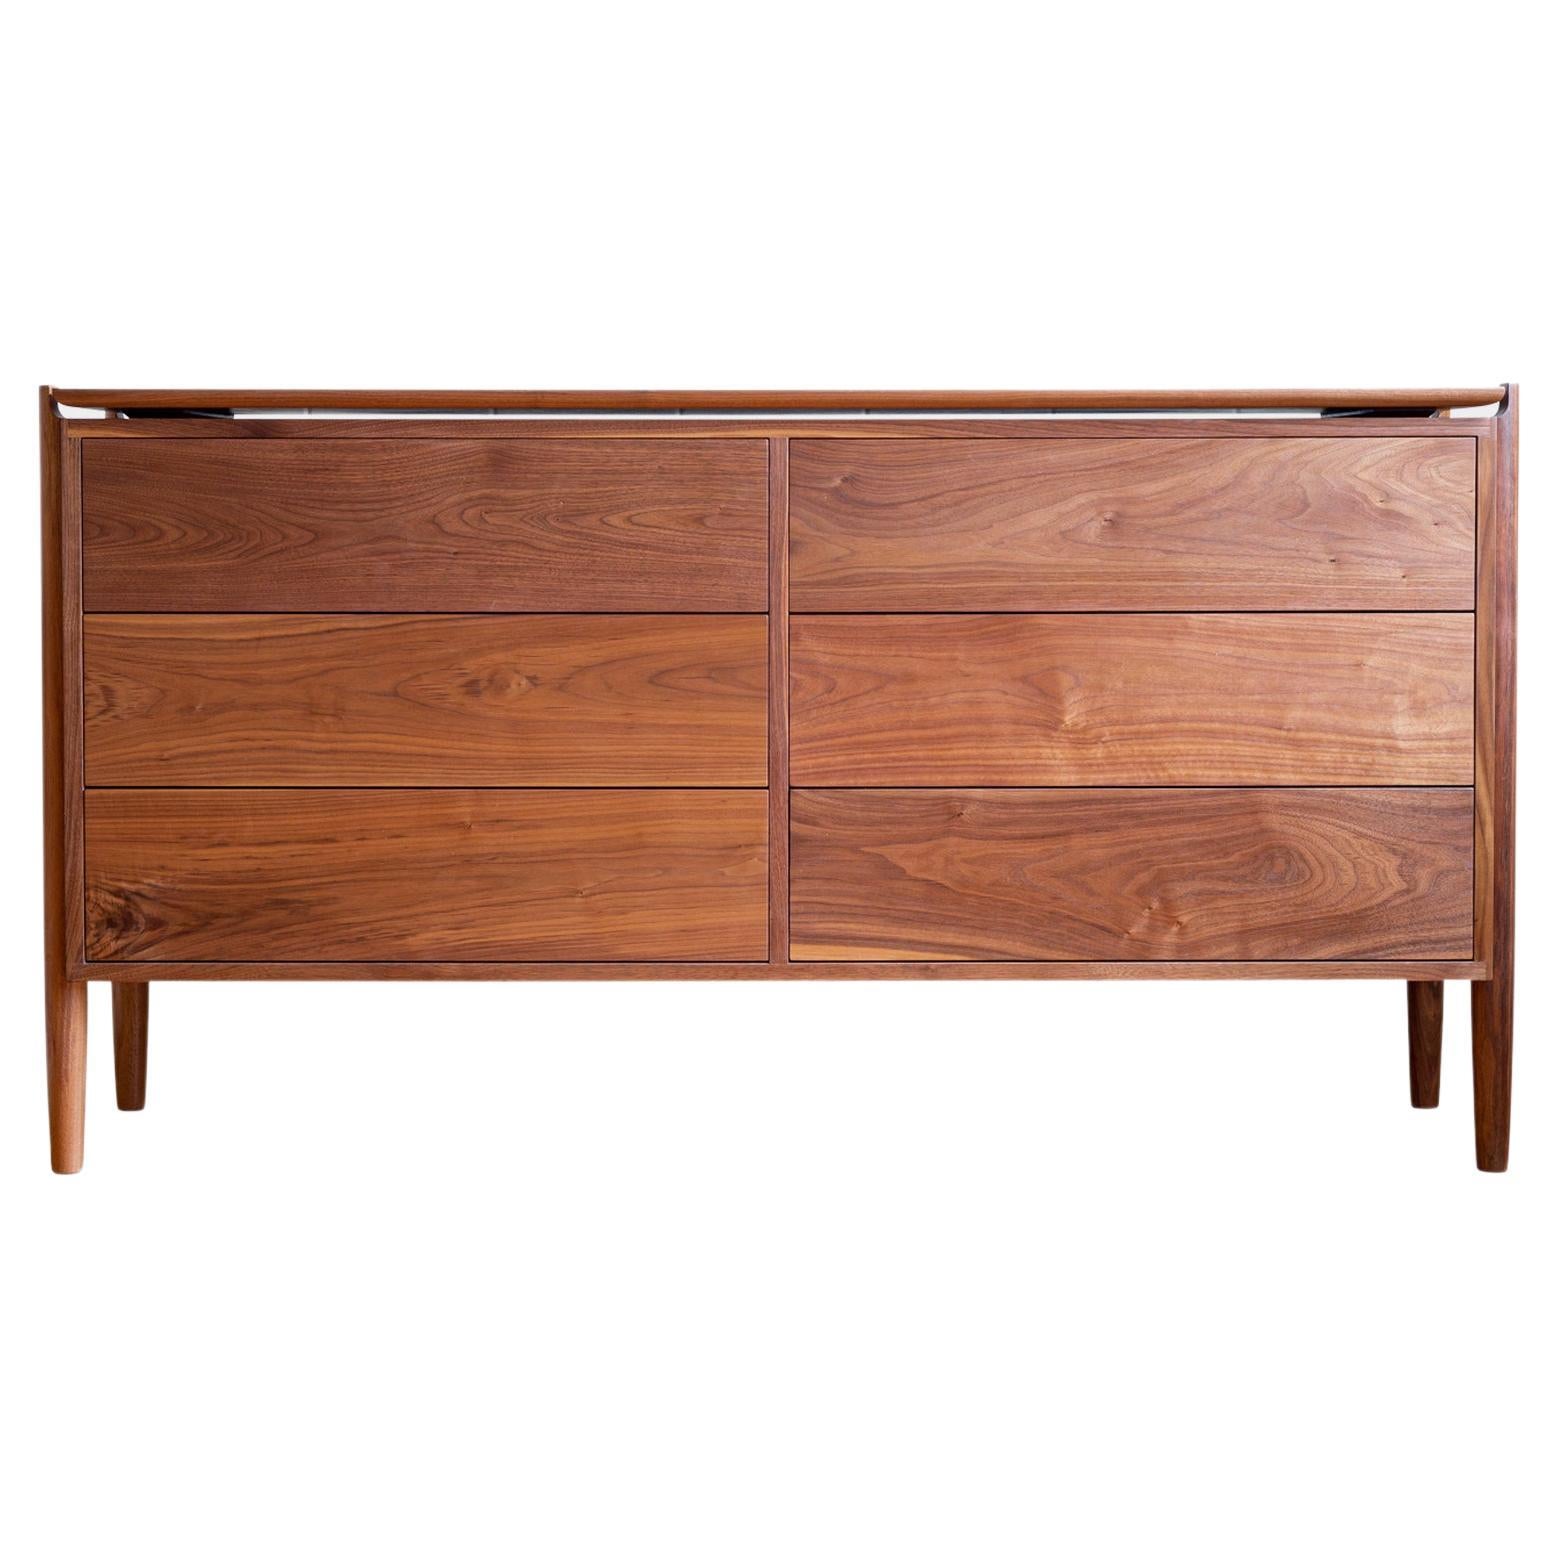 Low KABOT Sideboard in Walnut with 6 Drawers